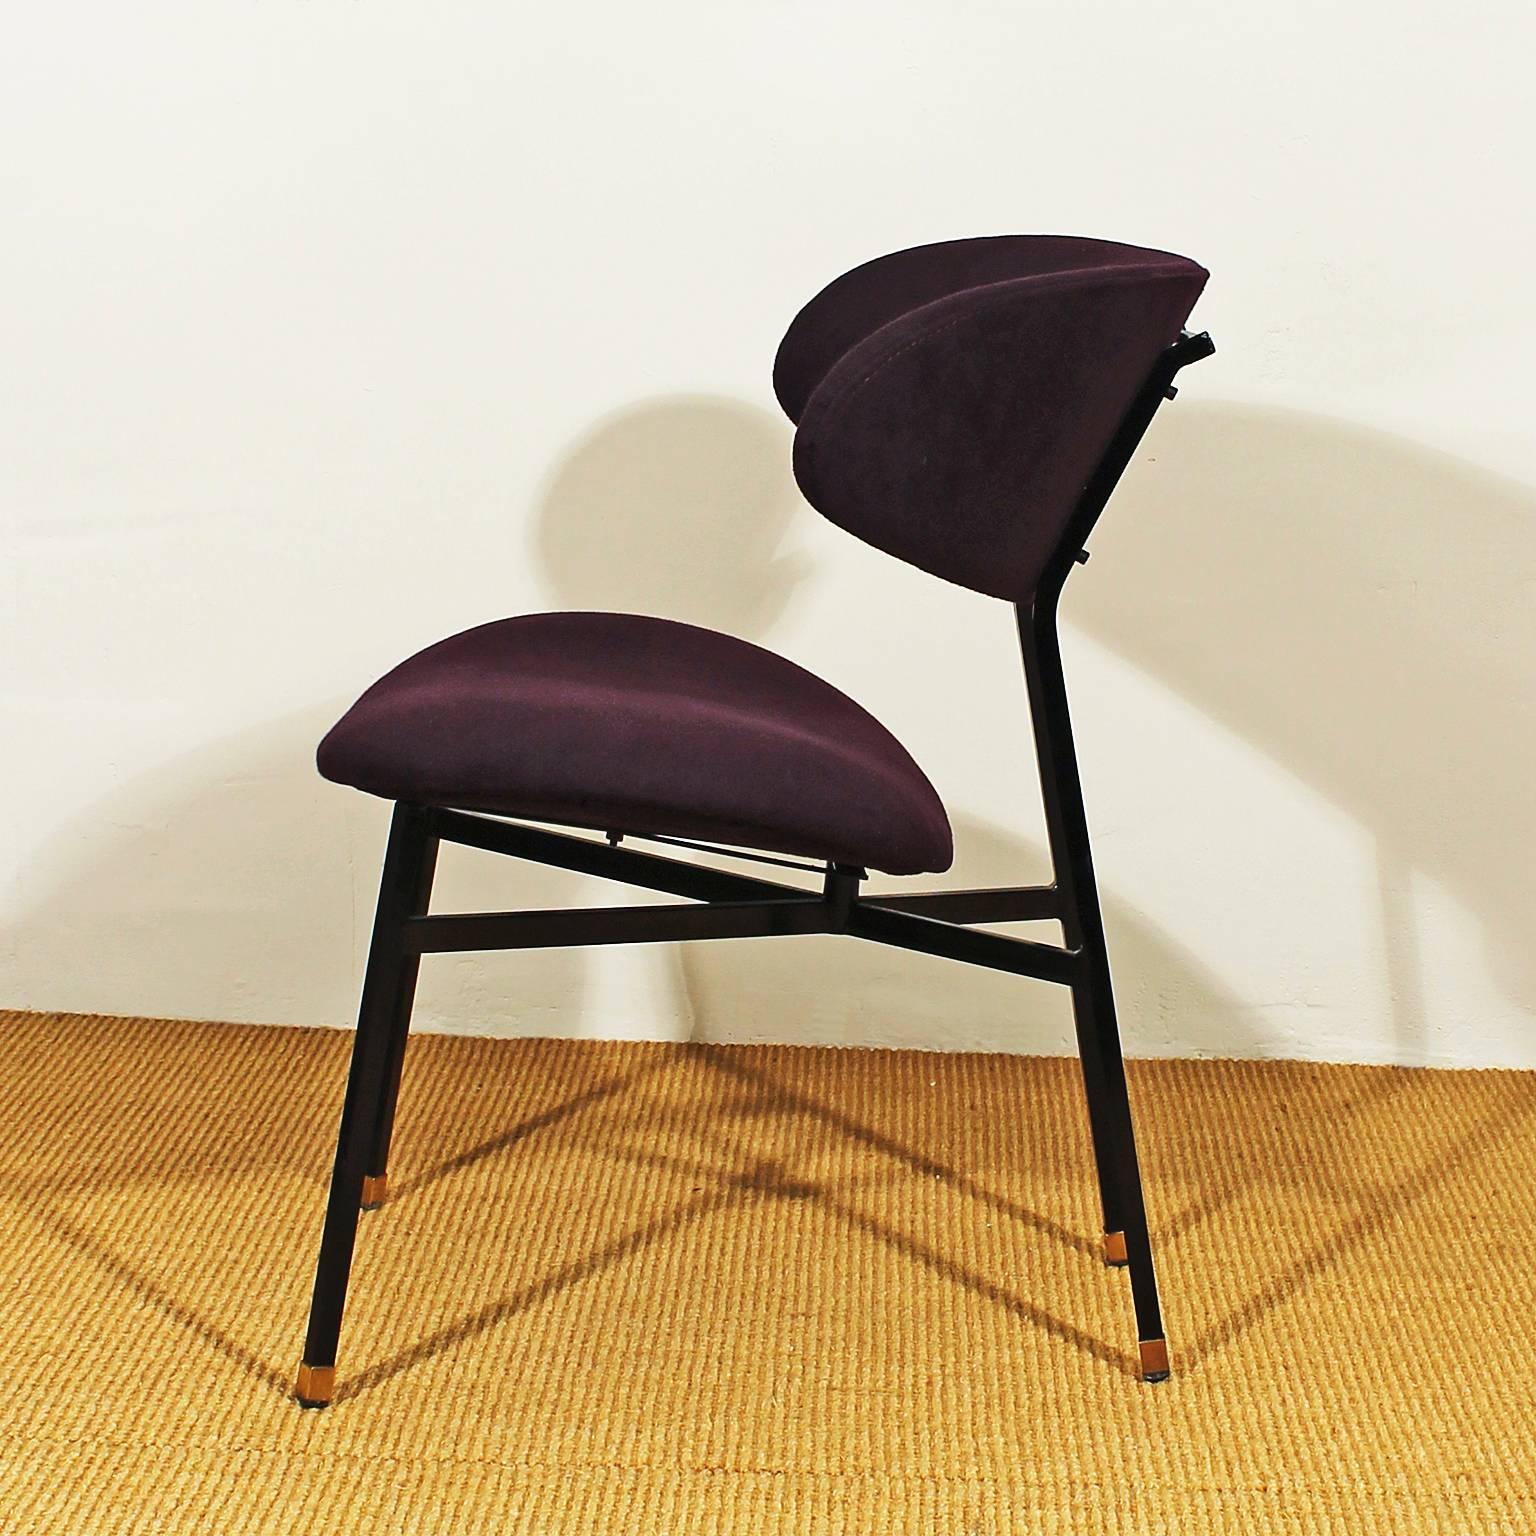 Italian 1950s Pair of Low Chairs, Iron, Brass, Violet Felt Upholstery, Italy